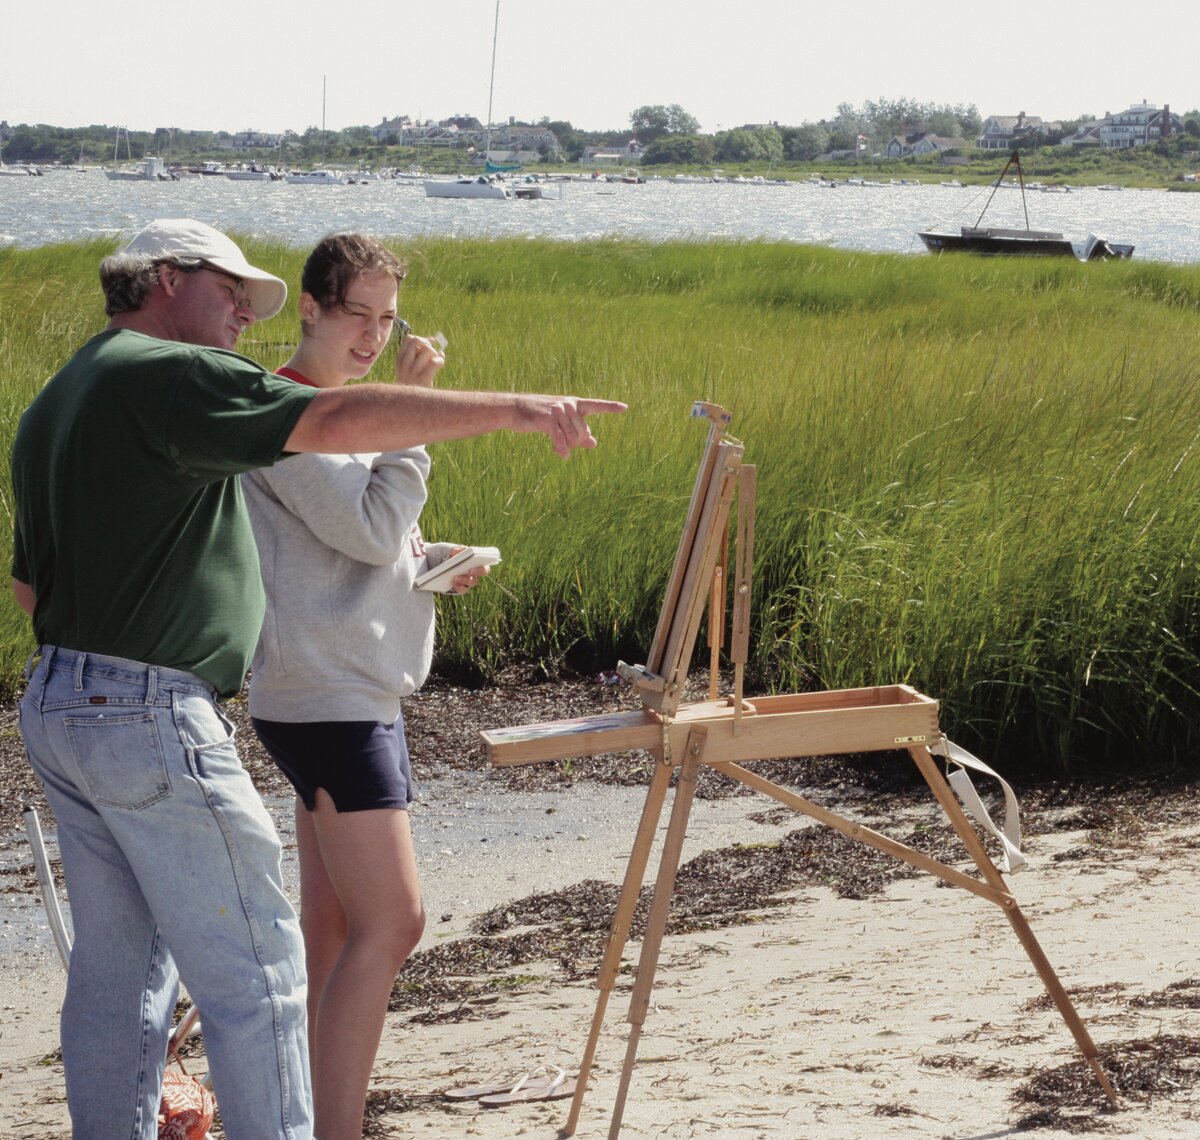 Nantucket Island School of Design and the Arts is resuming its full schedule of programming, including lectures, instruction and exhibitions, this summer after a four-year COVID-19-related hiatus.